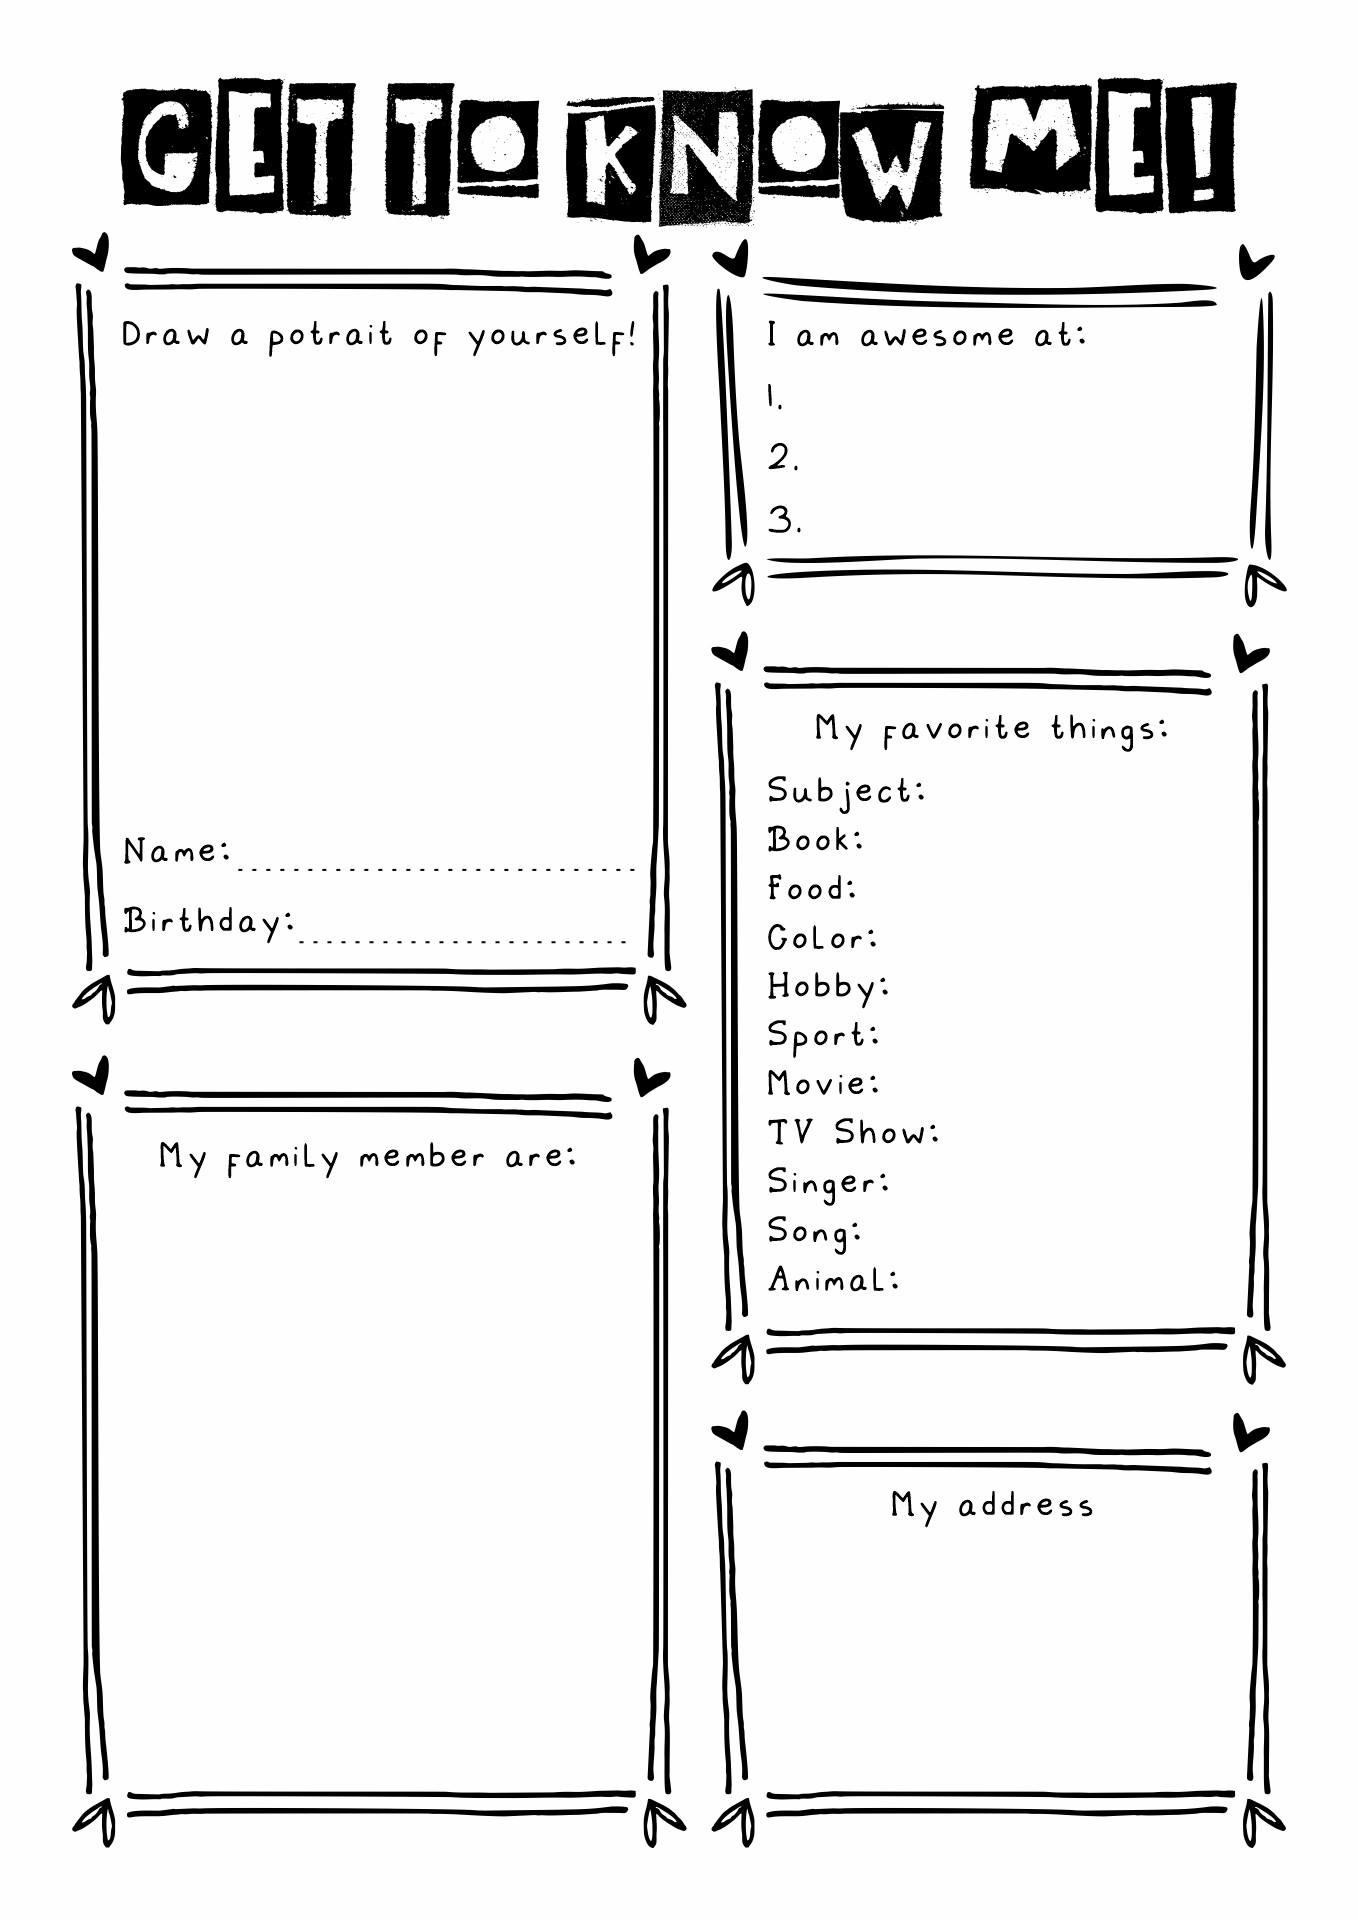 All About Me Ice Breaker Worksheet Image